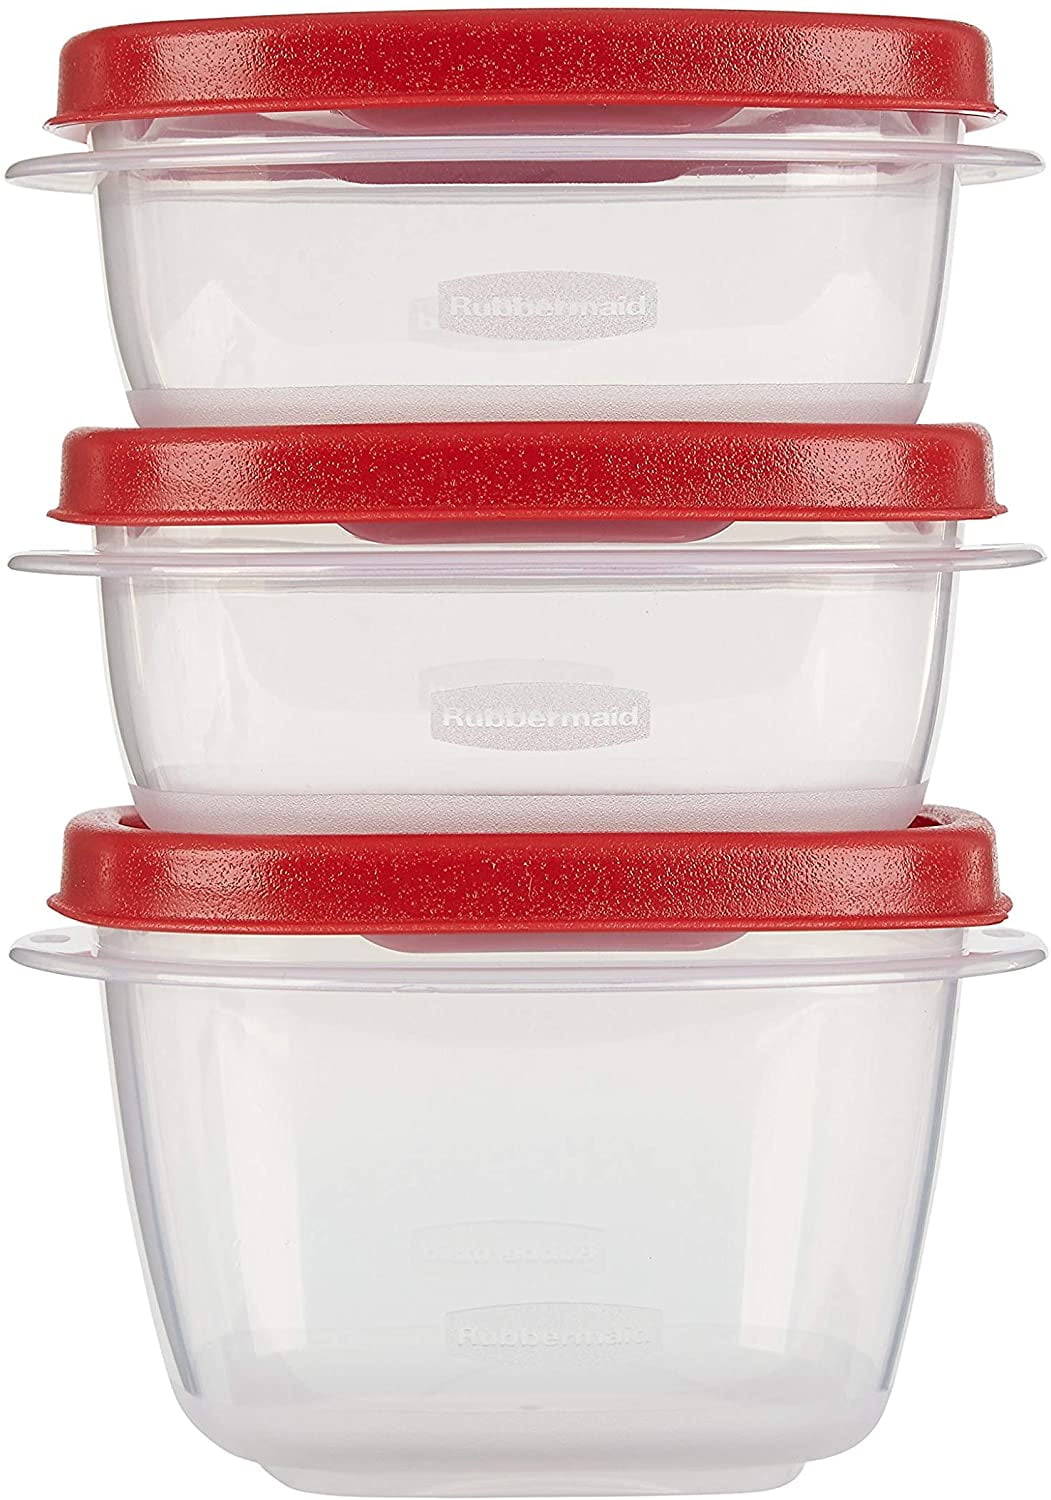 rubbermaid easy find containers